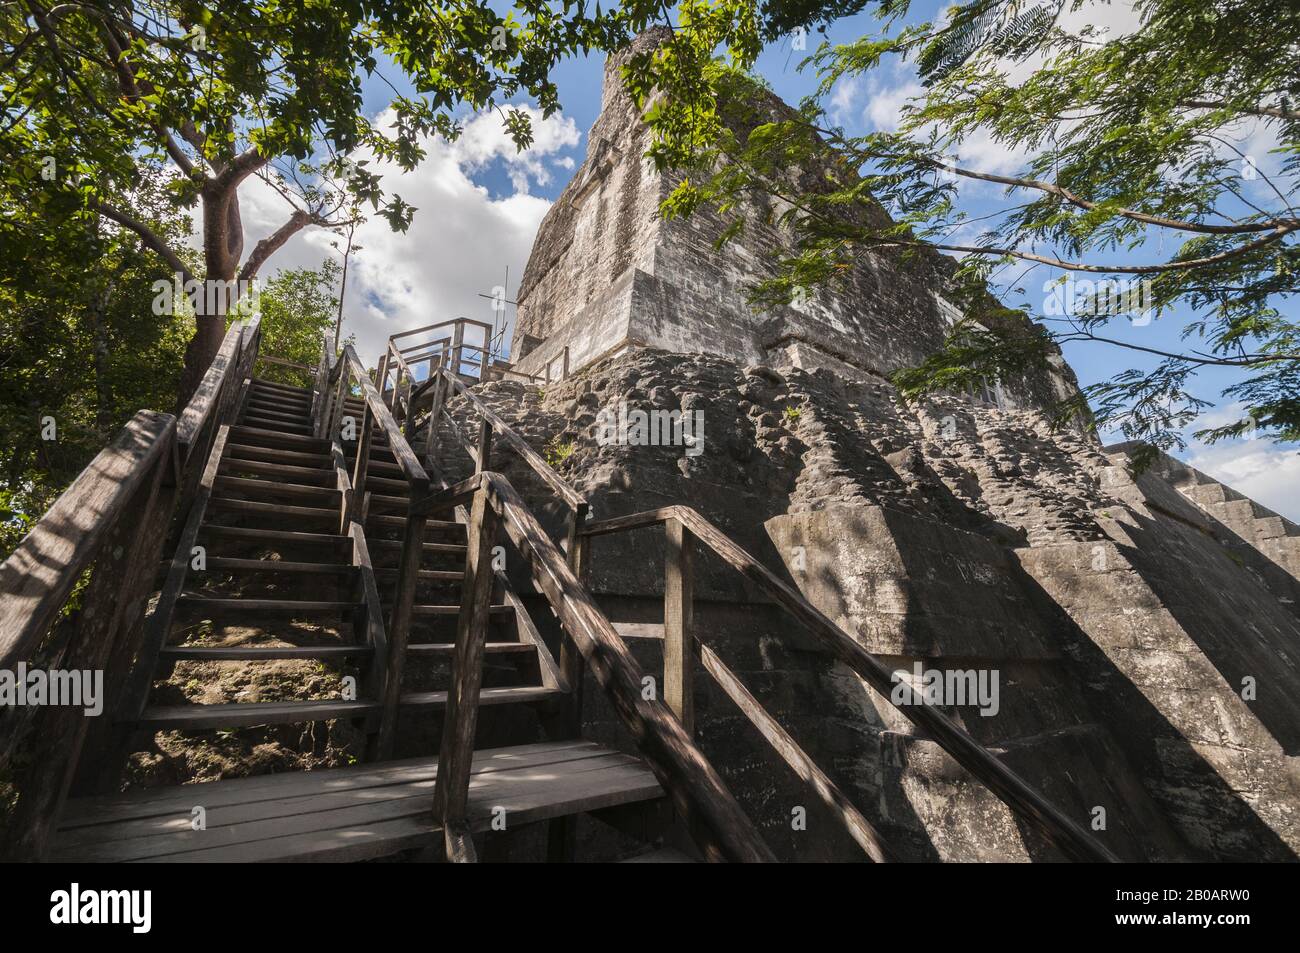 Guatemala, Tikal National Park, Templo IV, 741 AD, tallest Mayan pyramid, stairs up to pyramid; UNESCO World Heritage Site Stock Photo